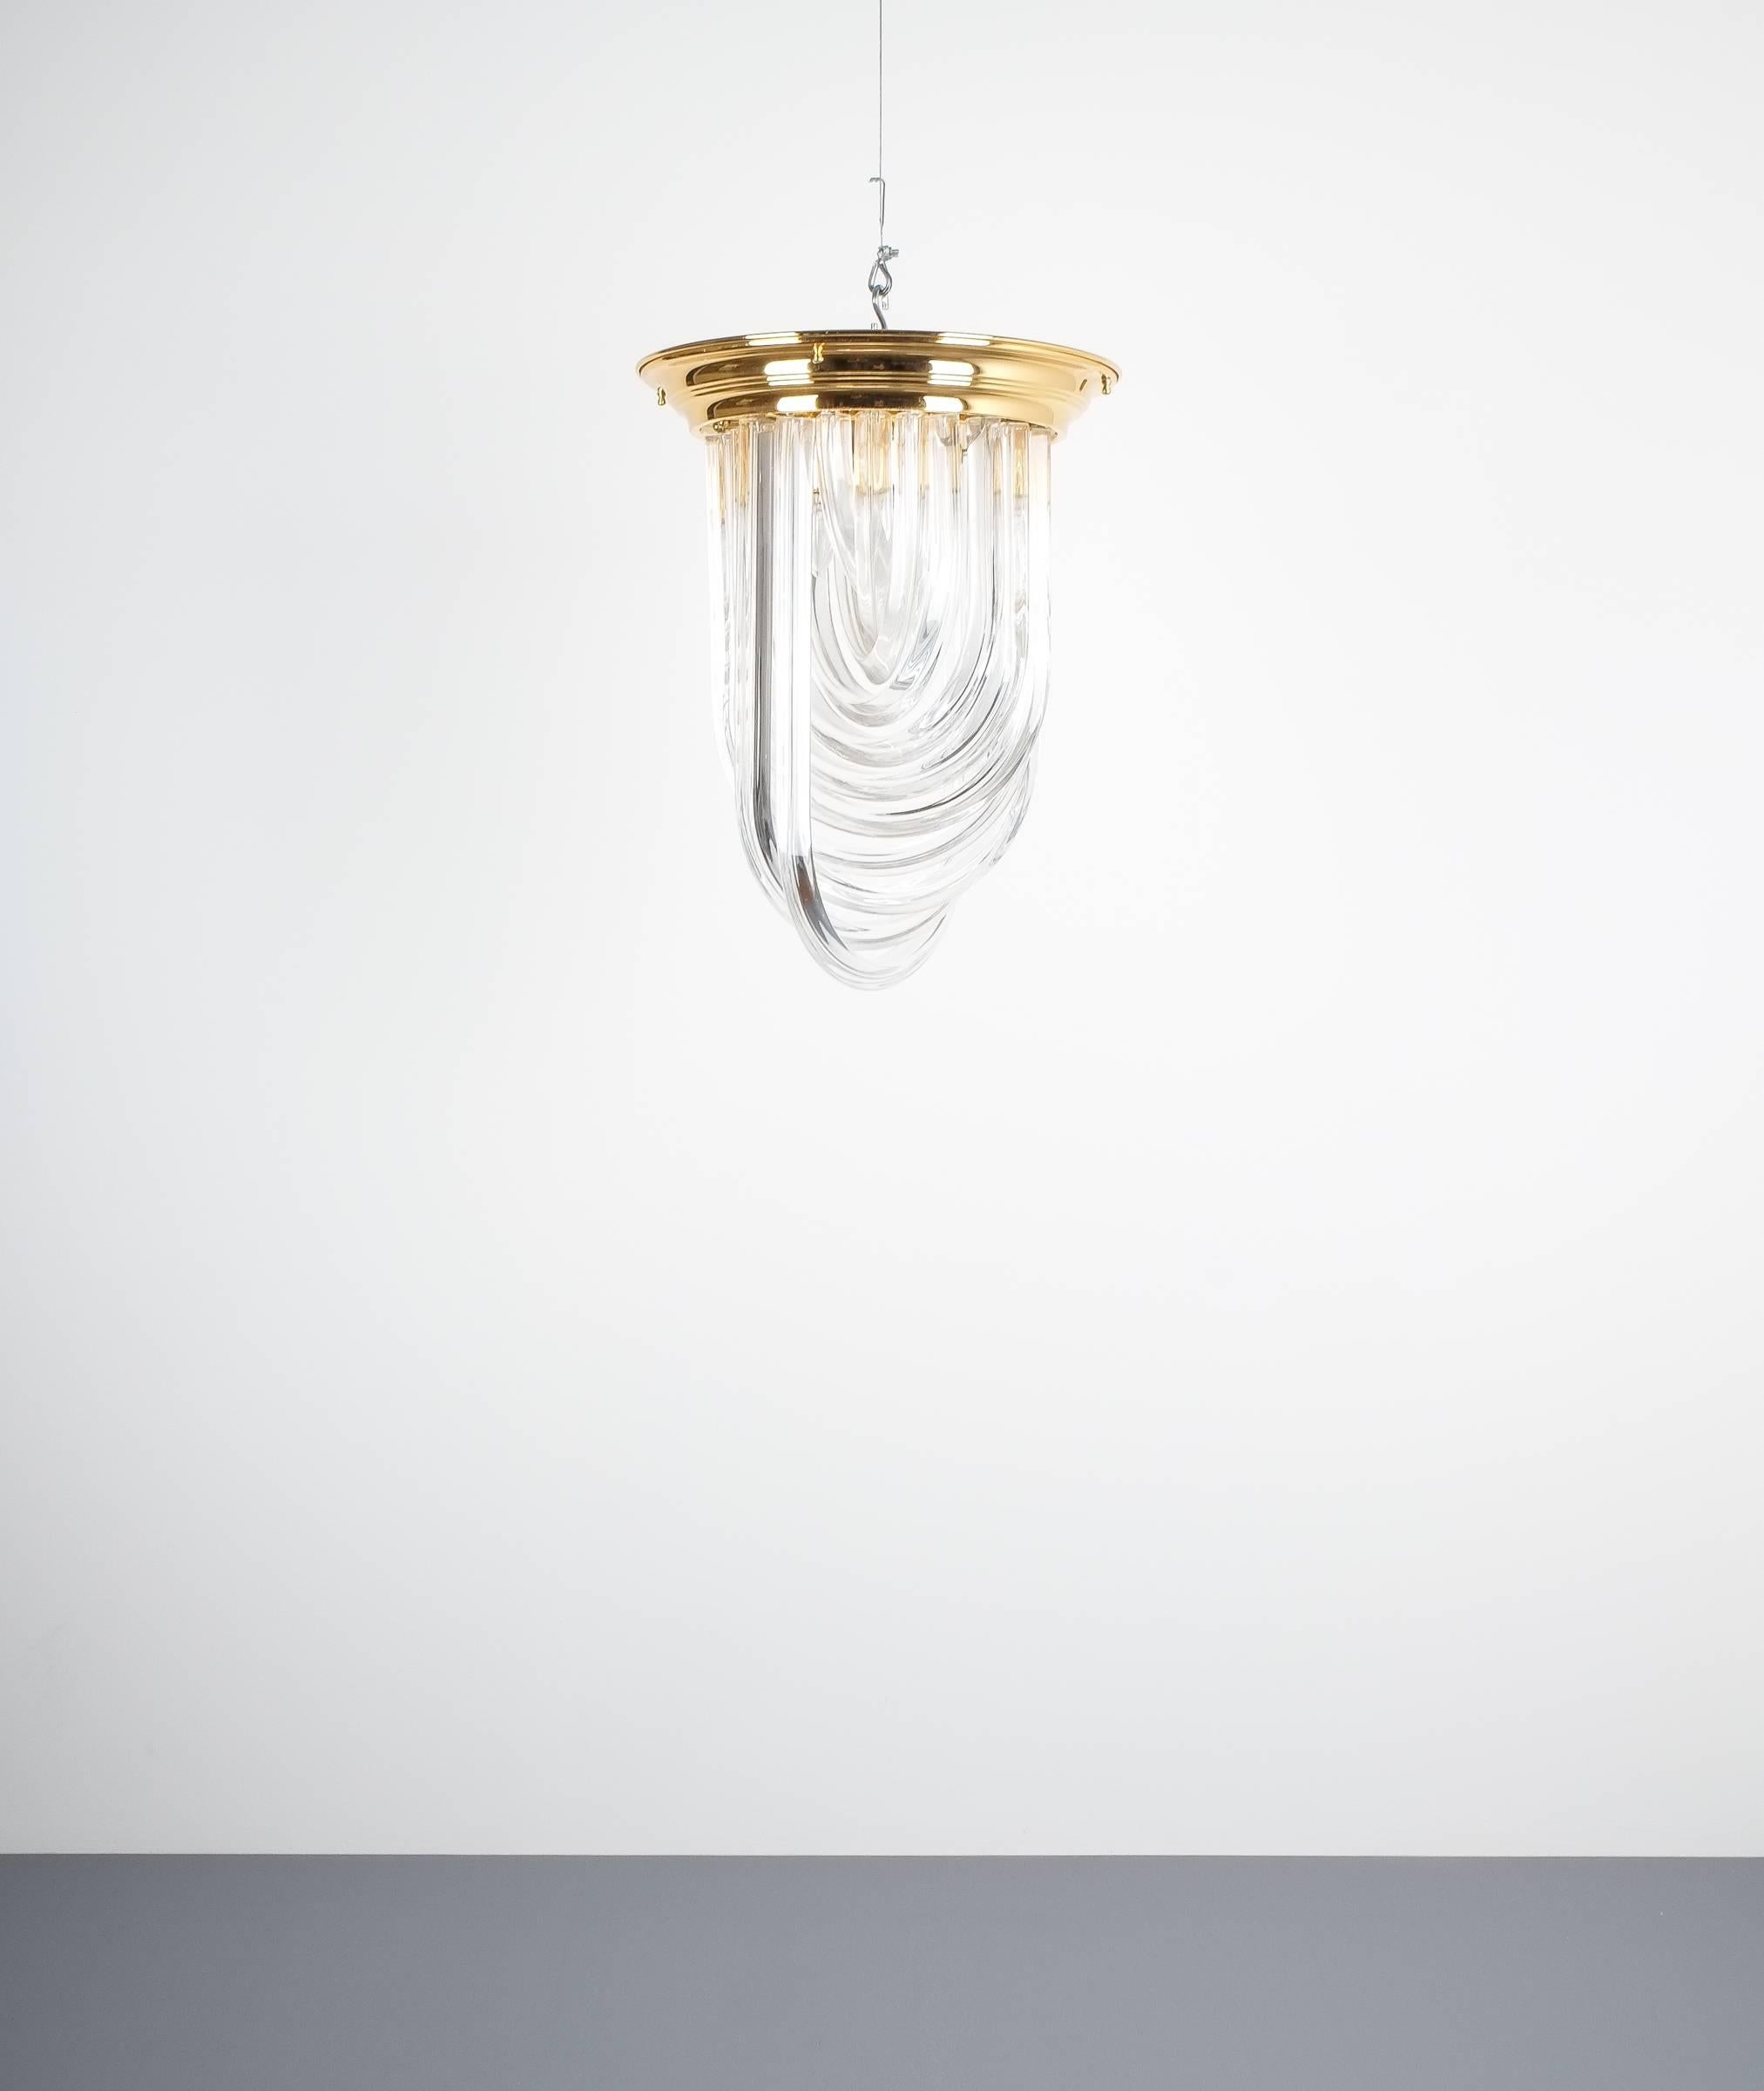 Venini curved crystal glass gilt brass flush mount lamp, Italy, 1960. Triete crystal glass chandelier with interlocking bended triete crystal rods in helix formation. The frame is made from gilt brass, the overall condition is excellent, cleaned,